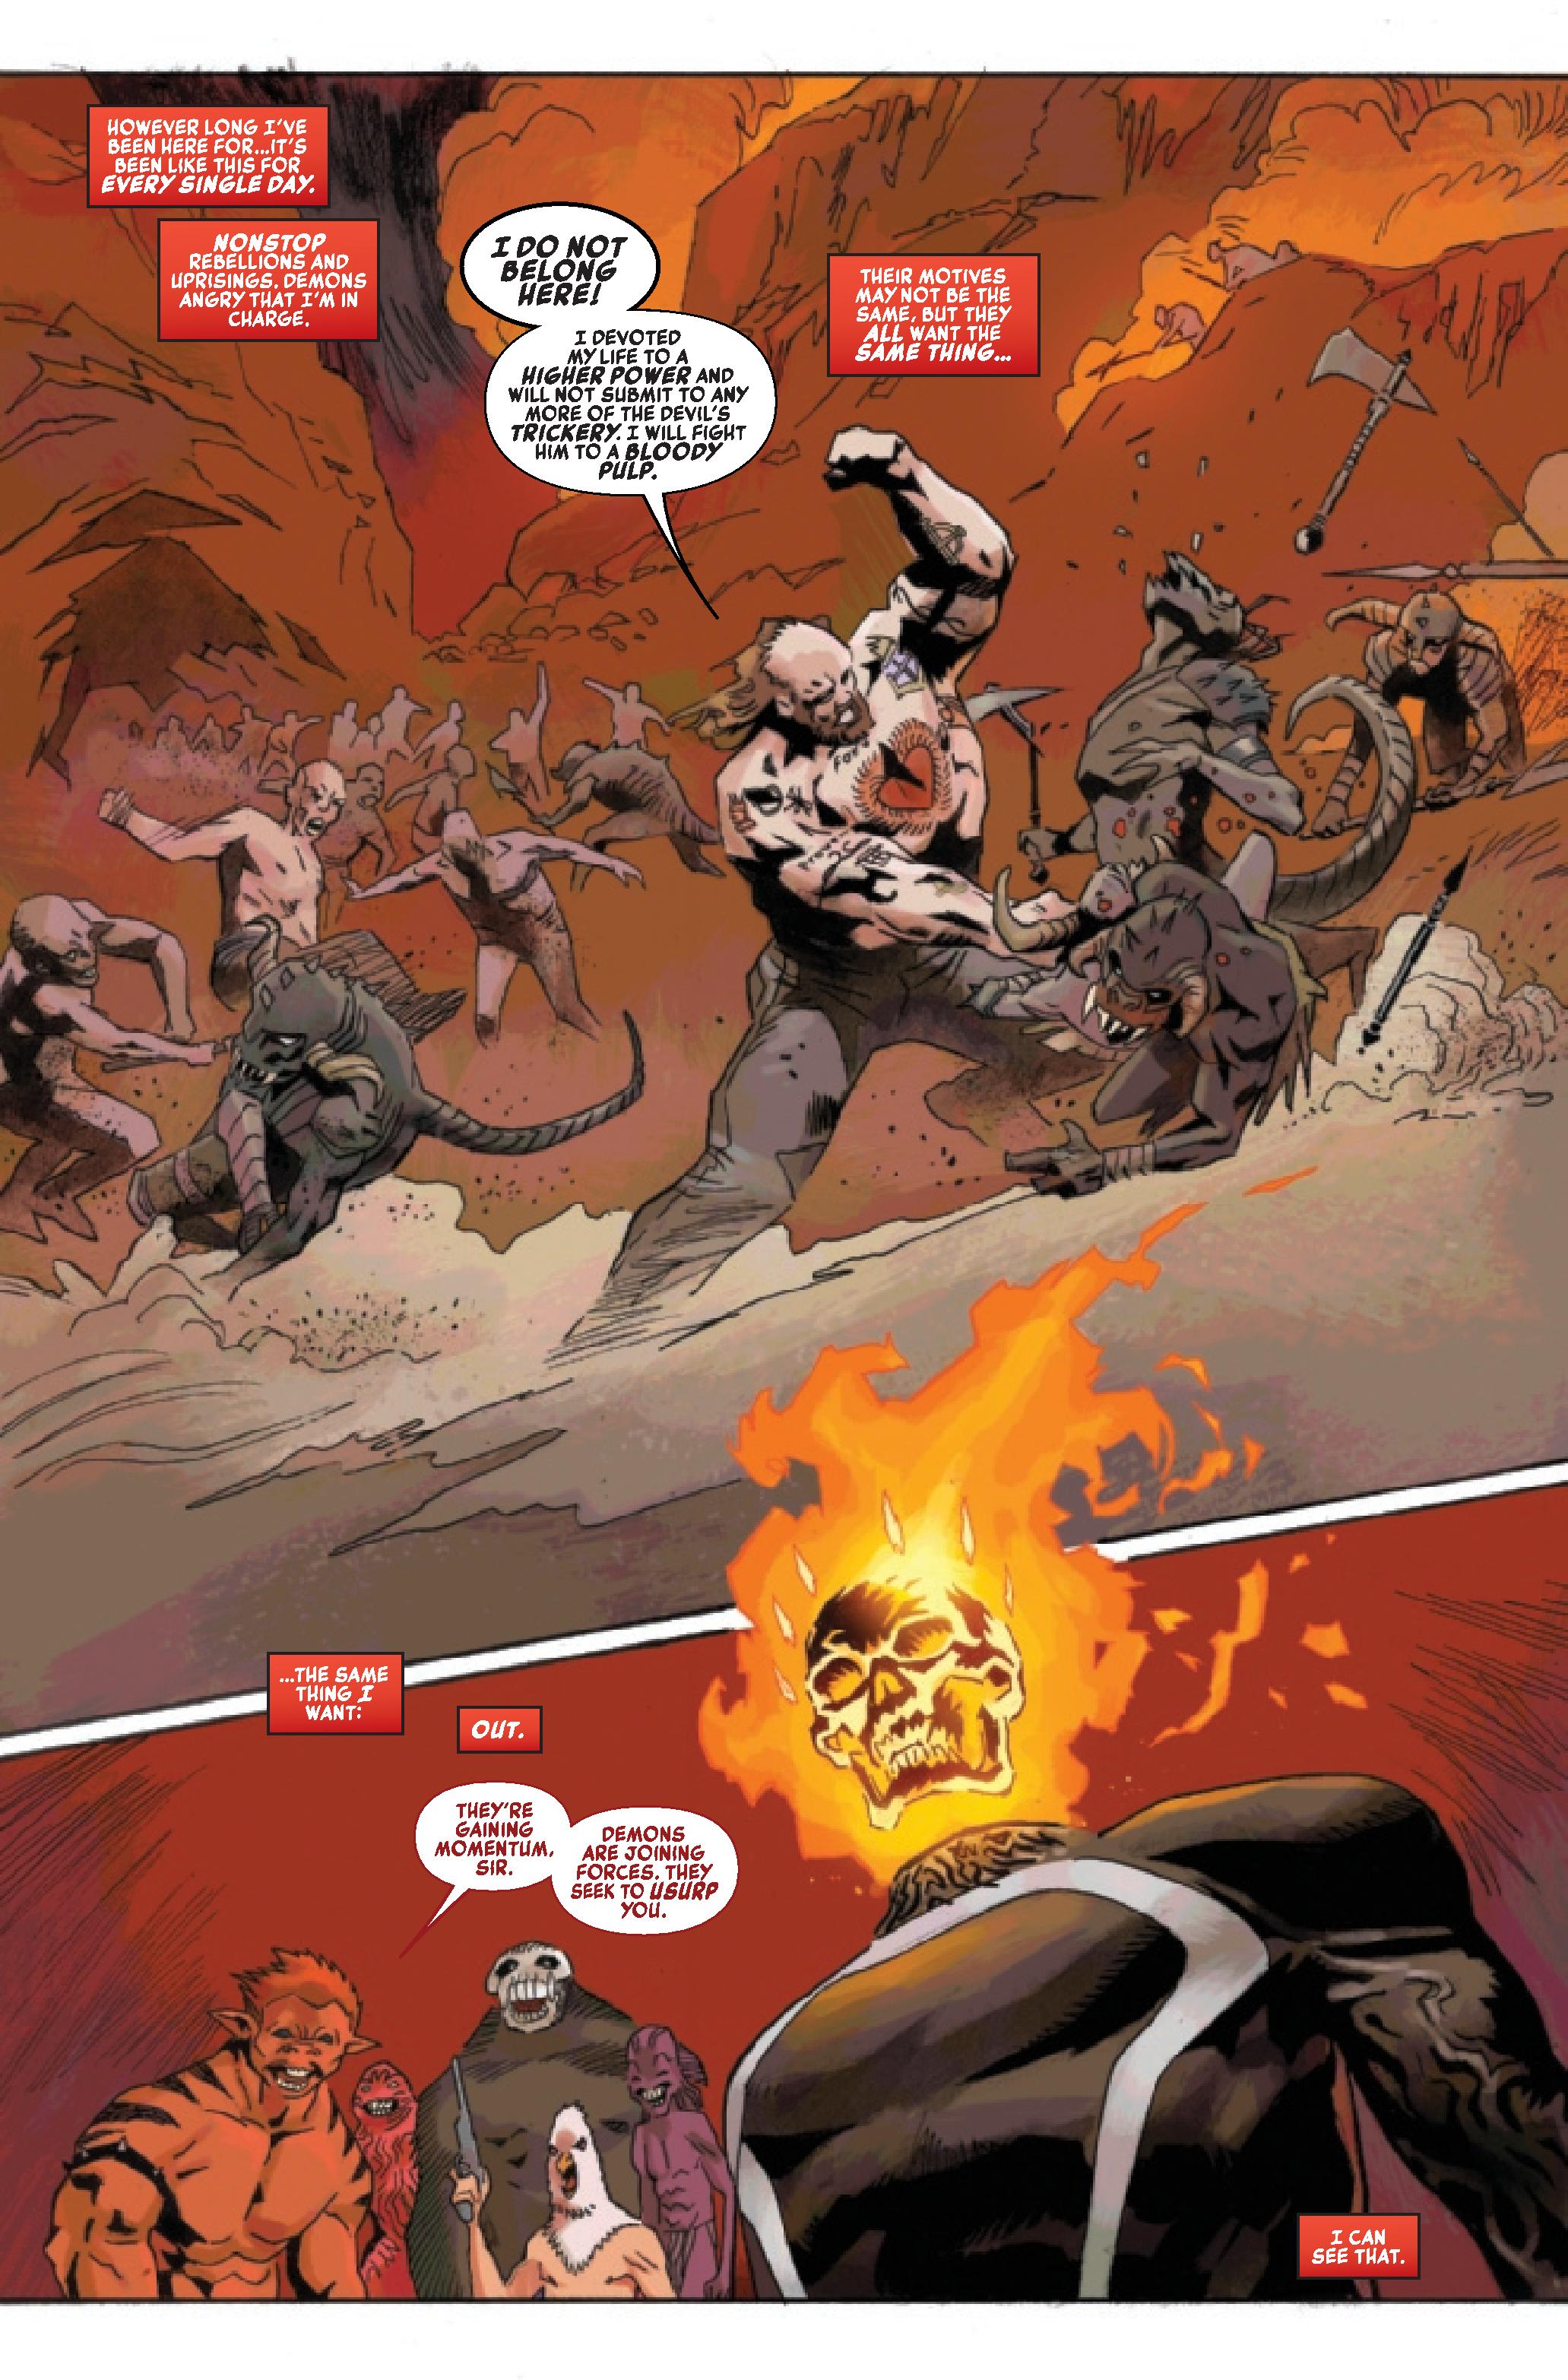 Spirits Ghost Rider Mother of Demons #1